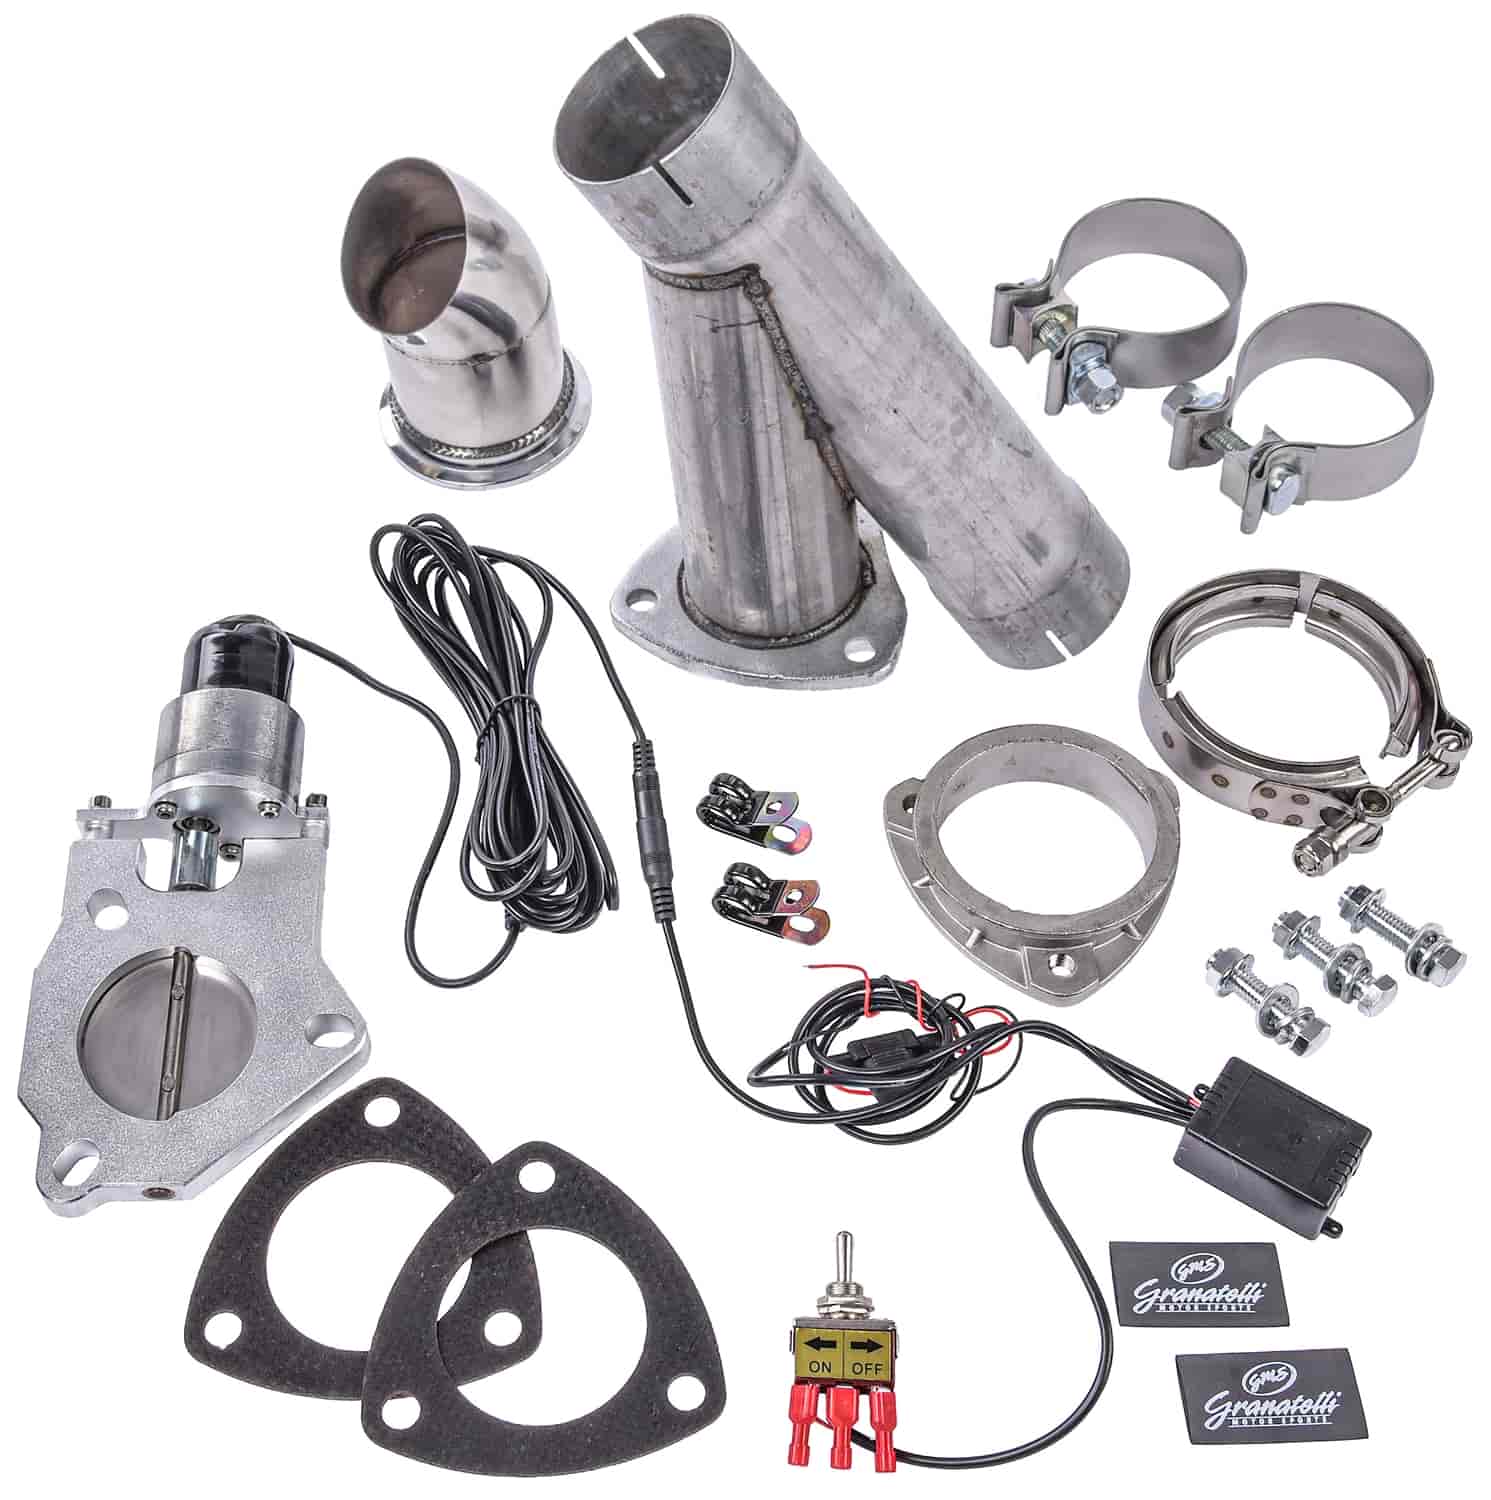 Electronic Aluminized Mild Steel Exhaust Cutout System for 2 1/2 in. Single Exhaust (Slip-Fit)